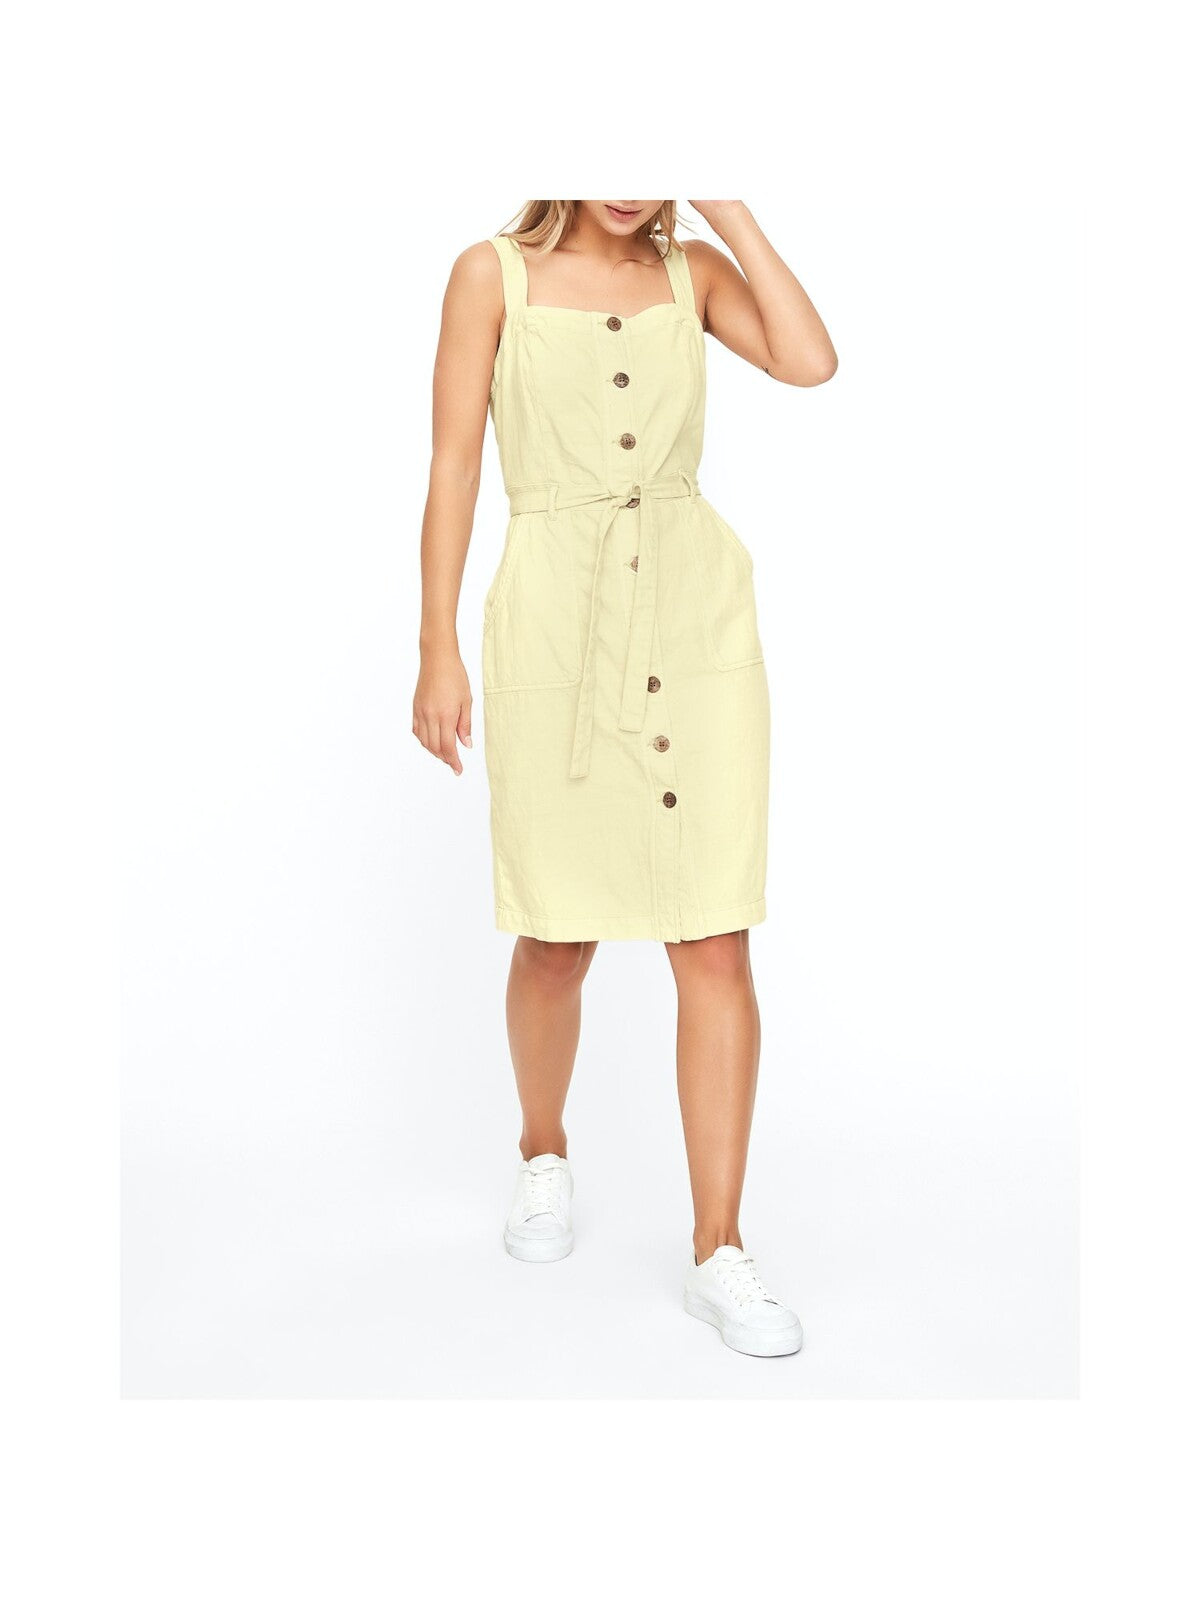 VERO MODA Womens Yellow Belted Pocketed Buttoned Twill Sleeveless Square Neck Above The Knee Sheath Dress XS